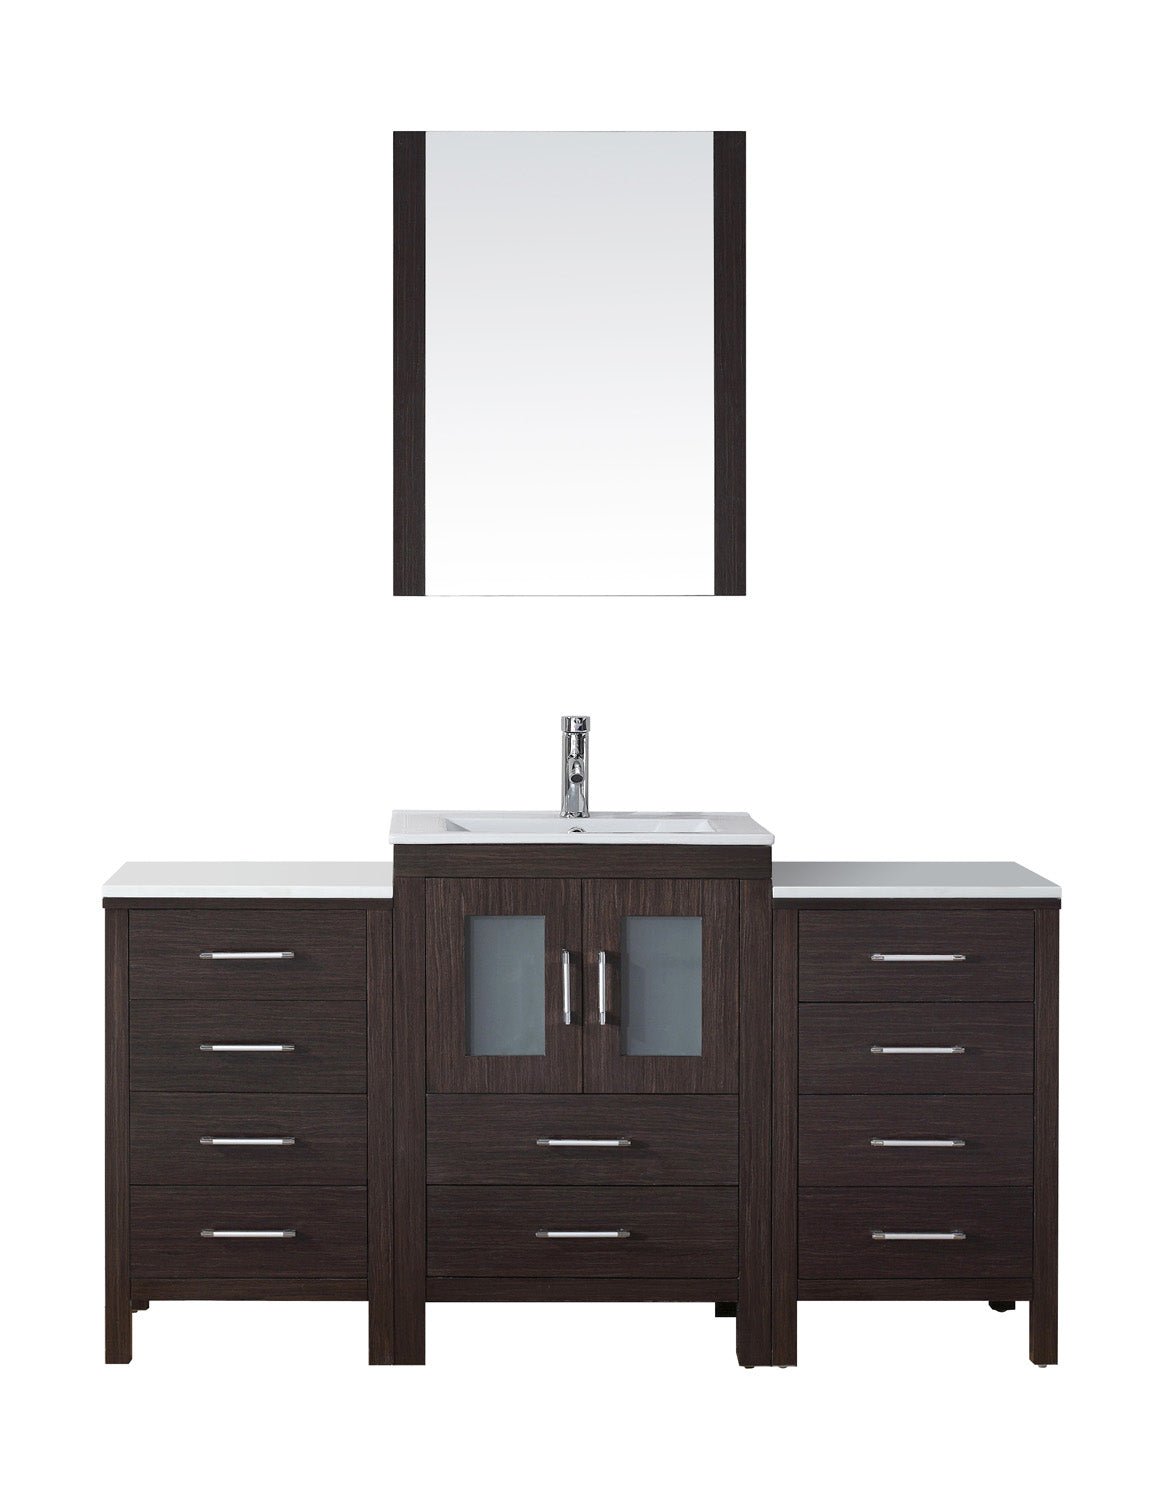 Virtu USA Dior 60" Single Bath Vanity in Espresso with Slim White Ceramic Top and Square Sink with Brushed Nickel Faucet and Mirror - Luxe Bathroom Vanities Luxury Bathroom Fixtures Bathroom Furniture